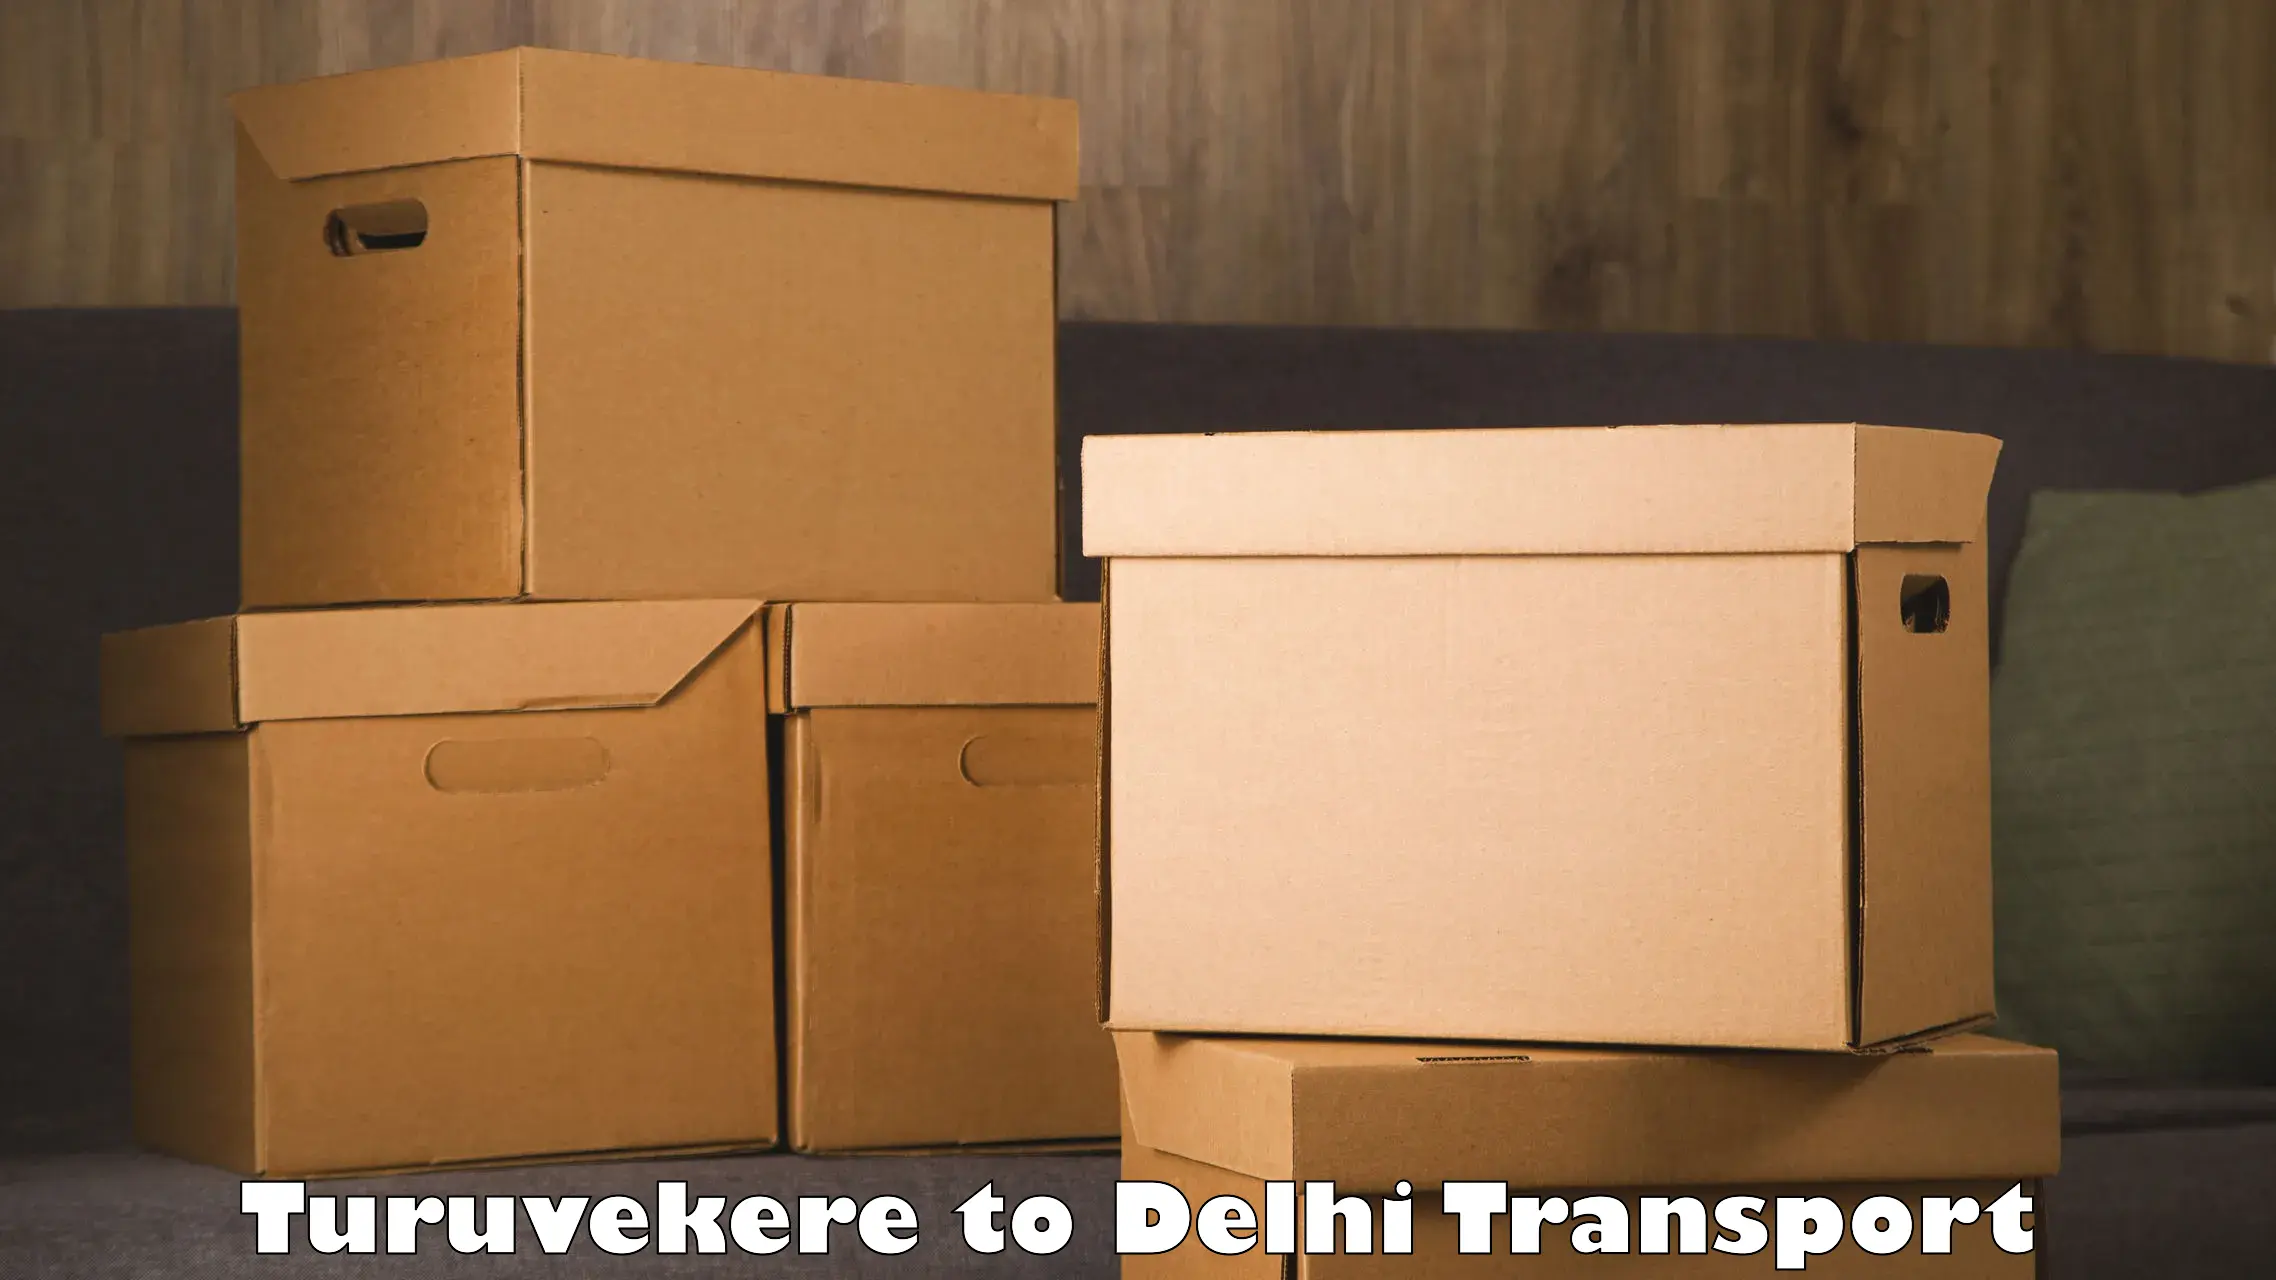 Truck transport companies in India Turuvekere to University of Delhi